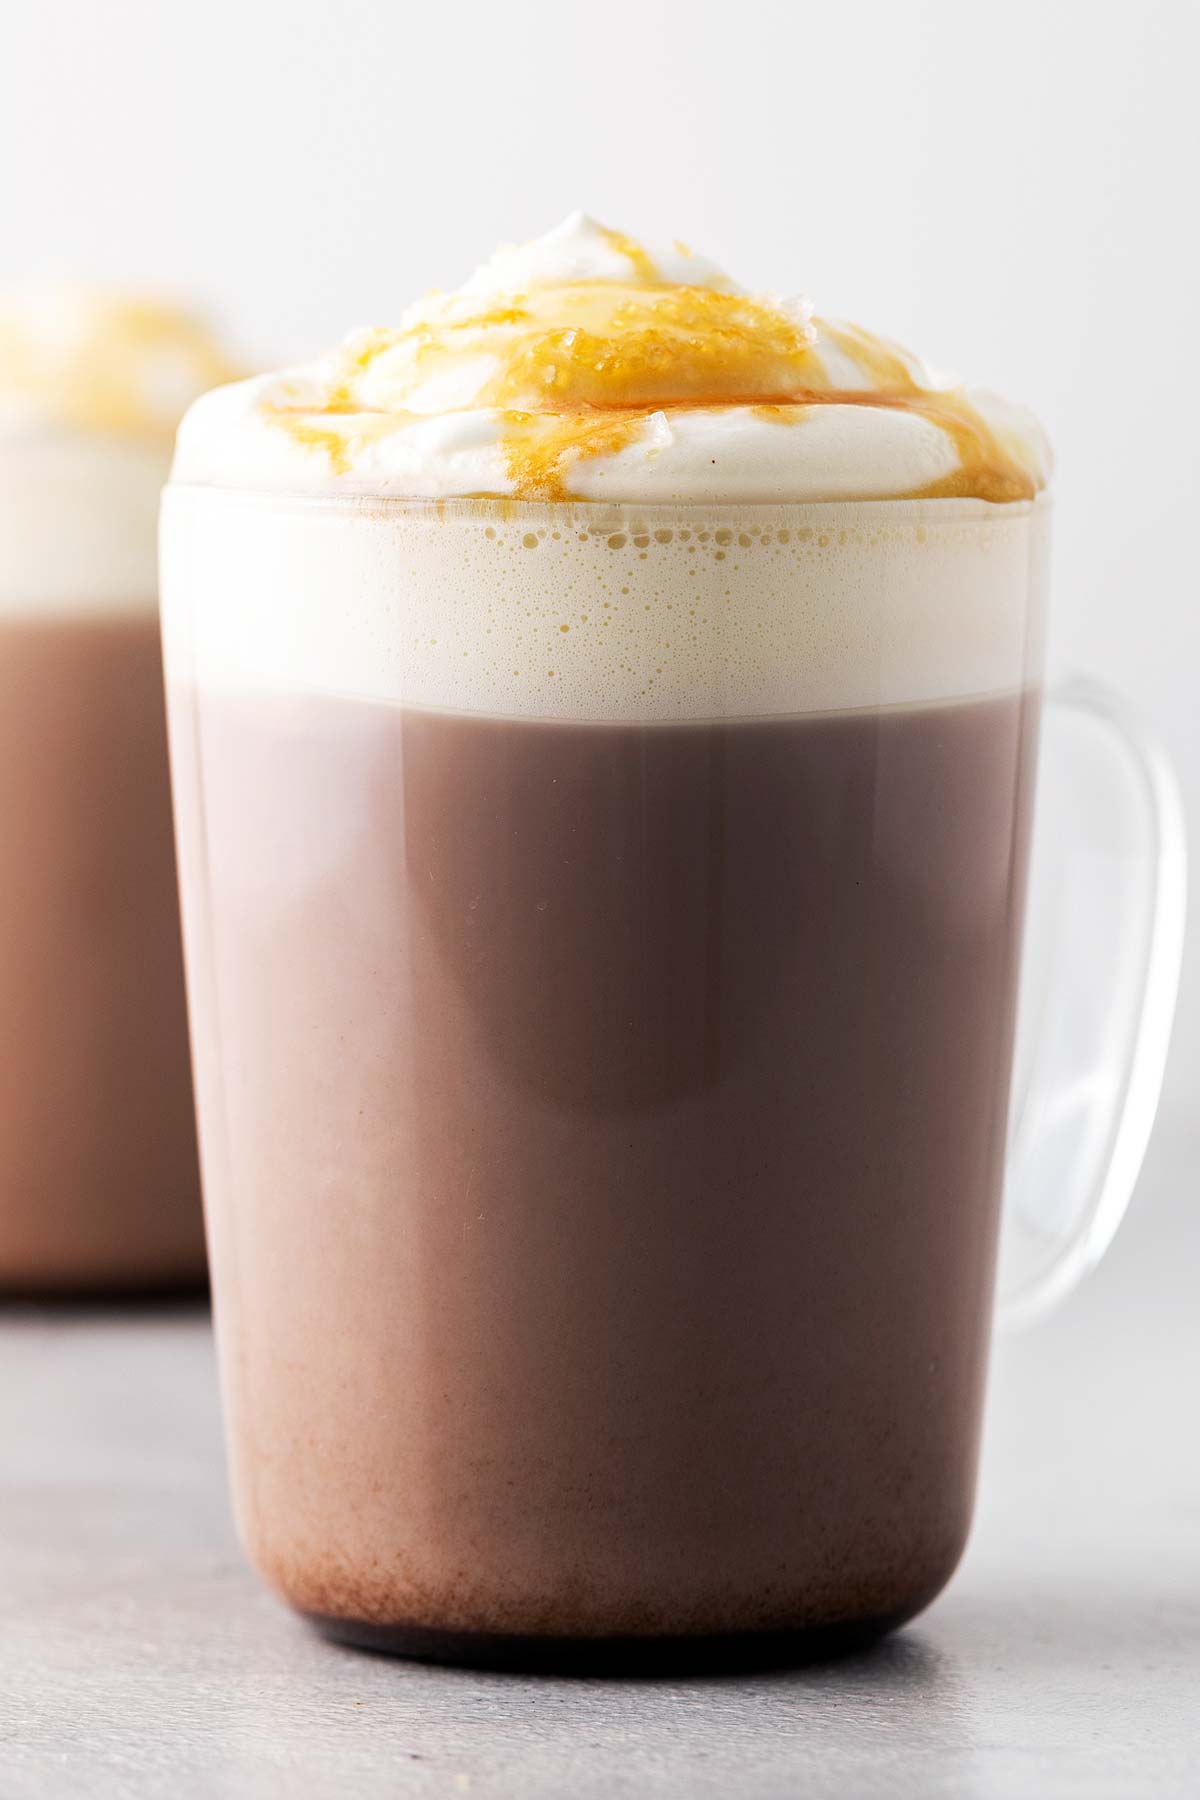 Salted Caramel Hot Chocolate in a cup with whipped cream.